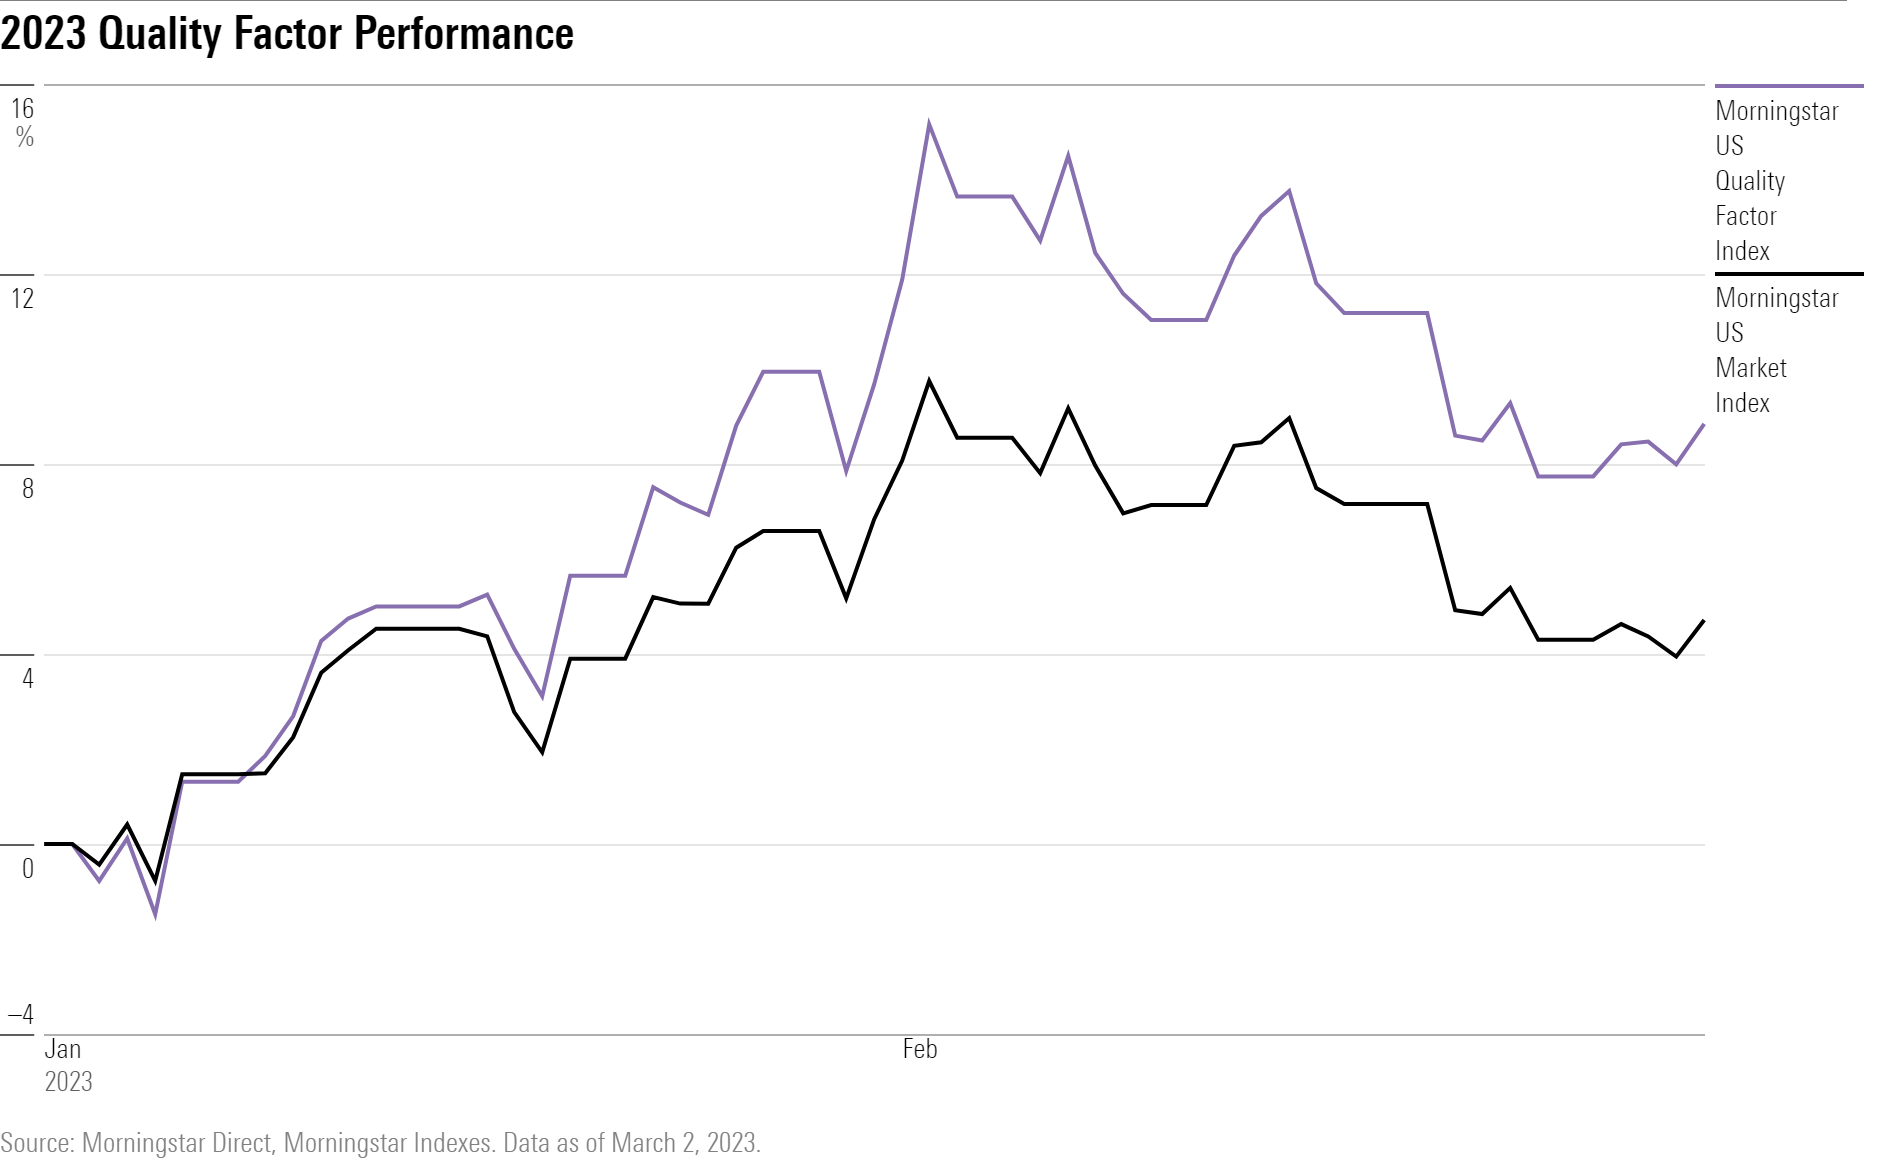 Line chart showing performance of the Morningstar US Quality Factor Index vs. the Morningstar US Market Index.